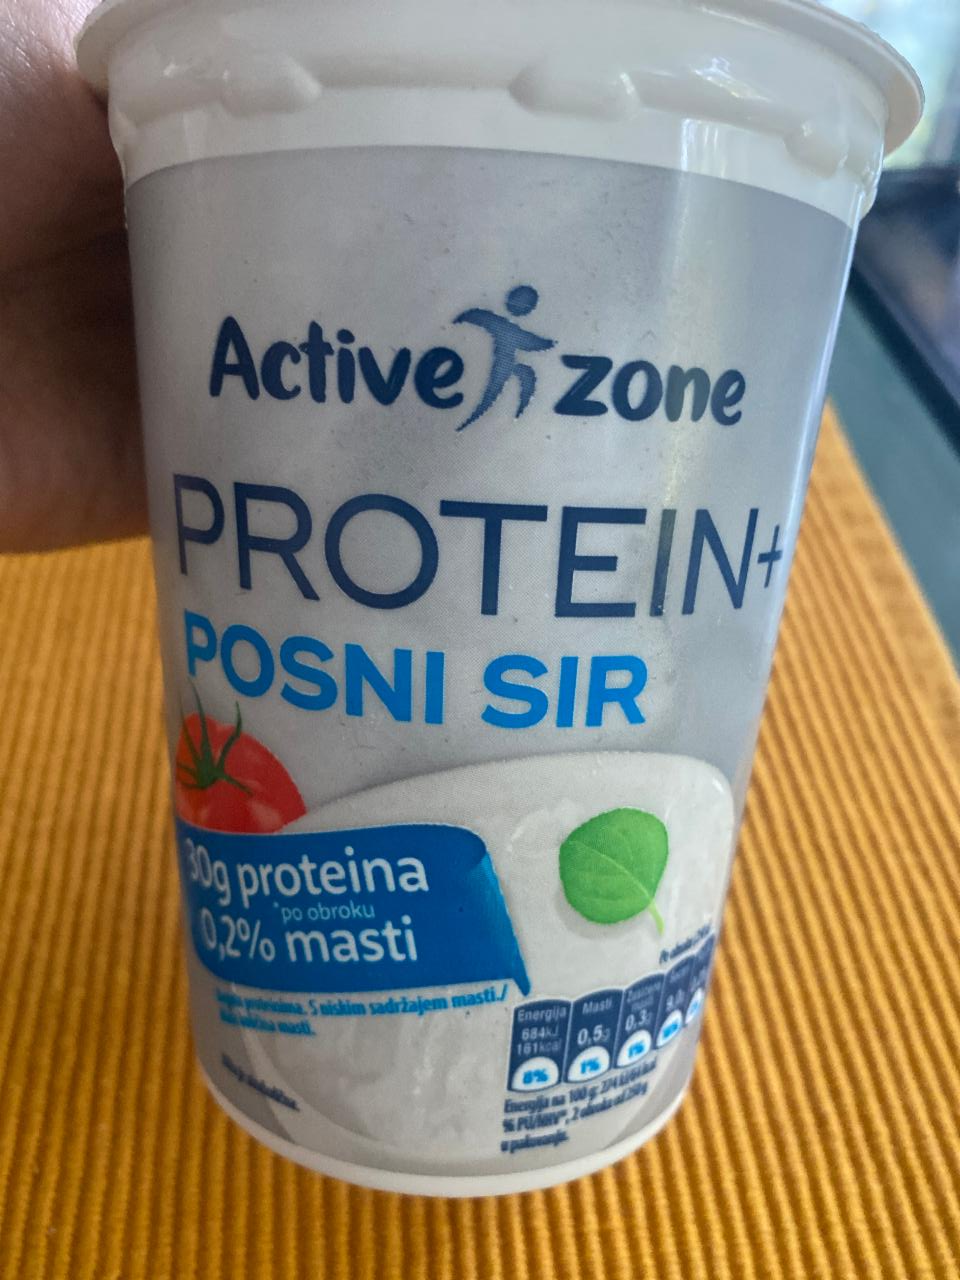 Фото - Protein+ Posni sir by Active Zone